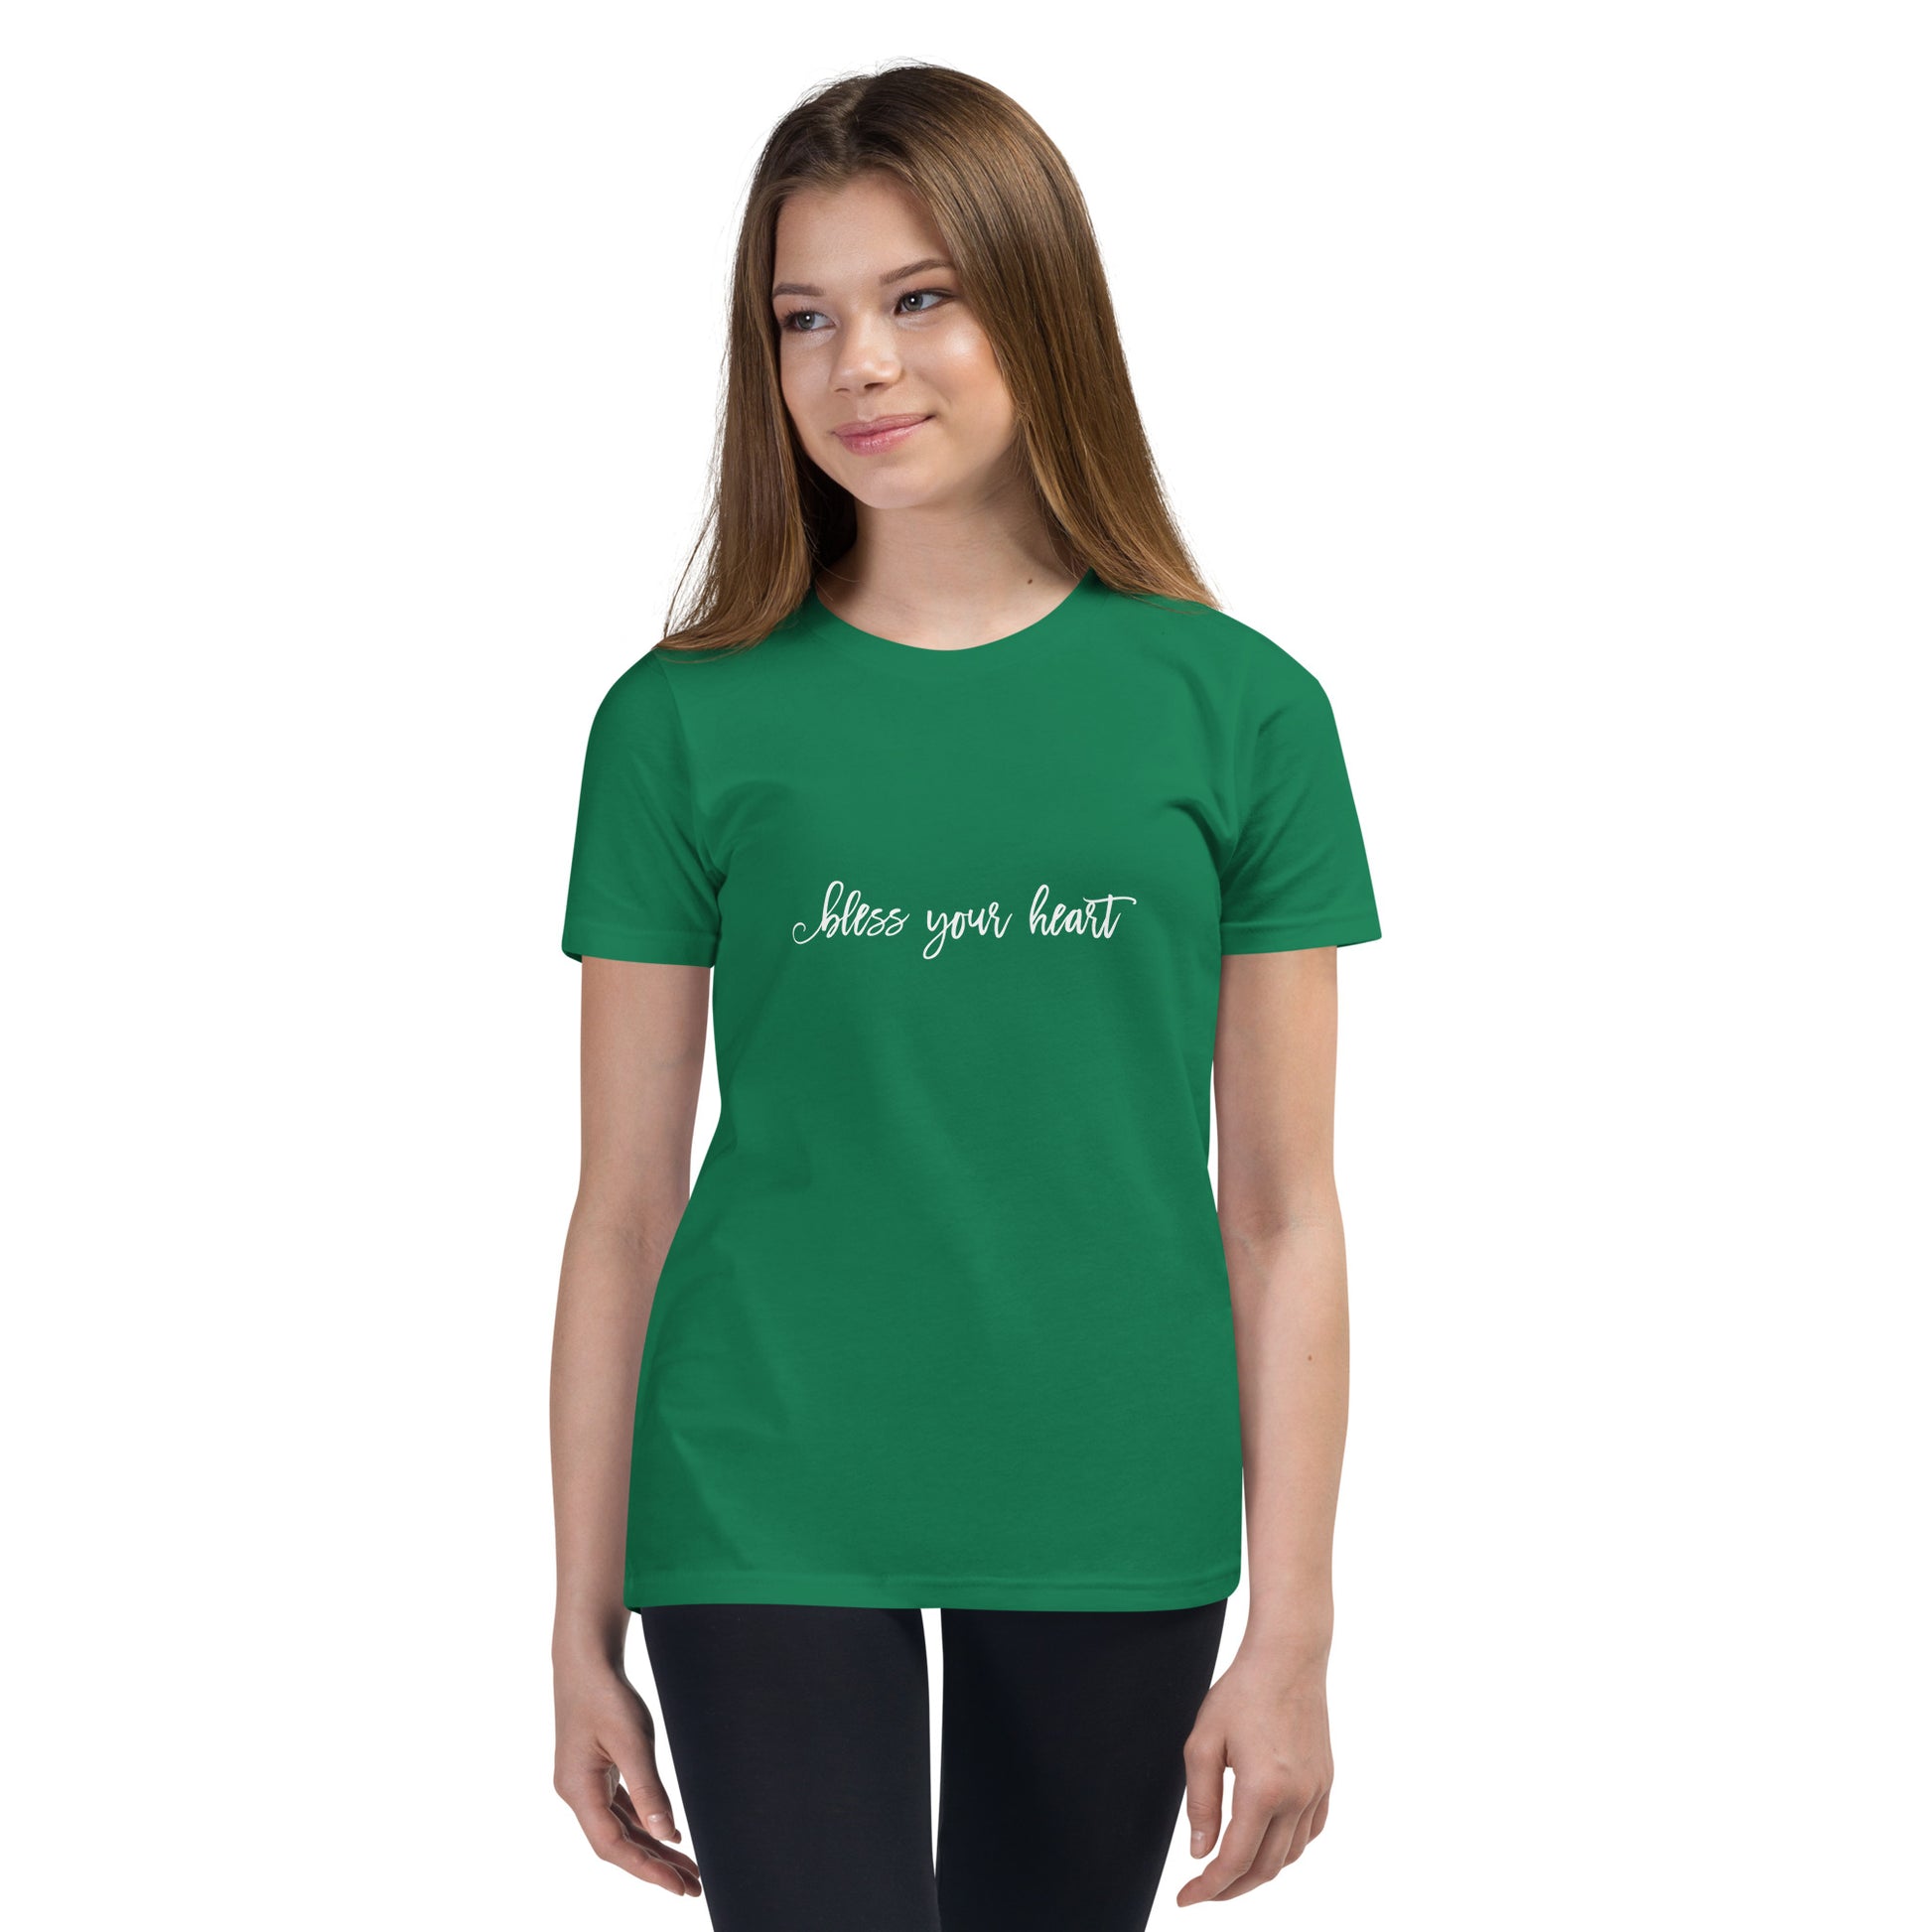 Model wearing Kelly green youth t-shirt with white graphic in an excessively twee font: "bless your heart"